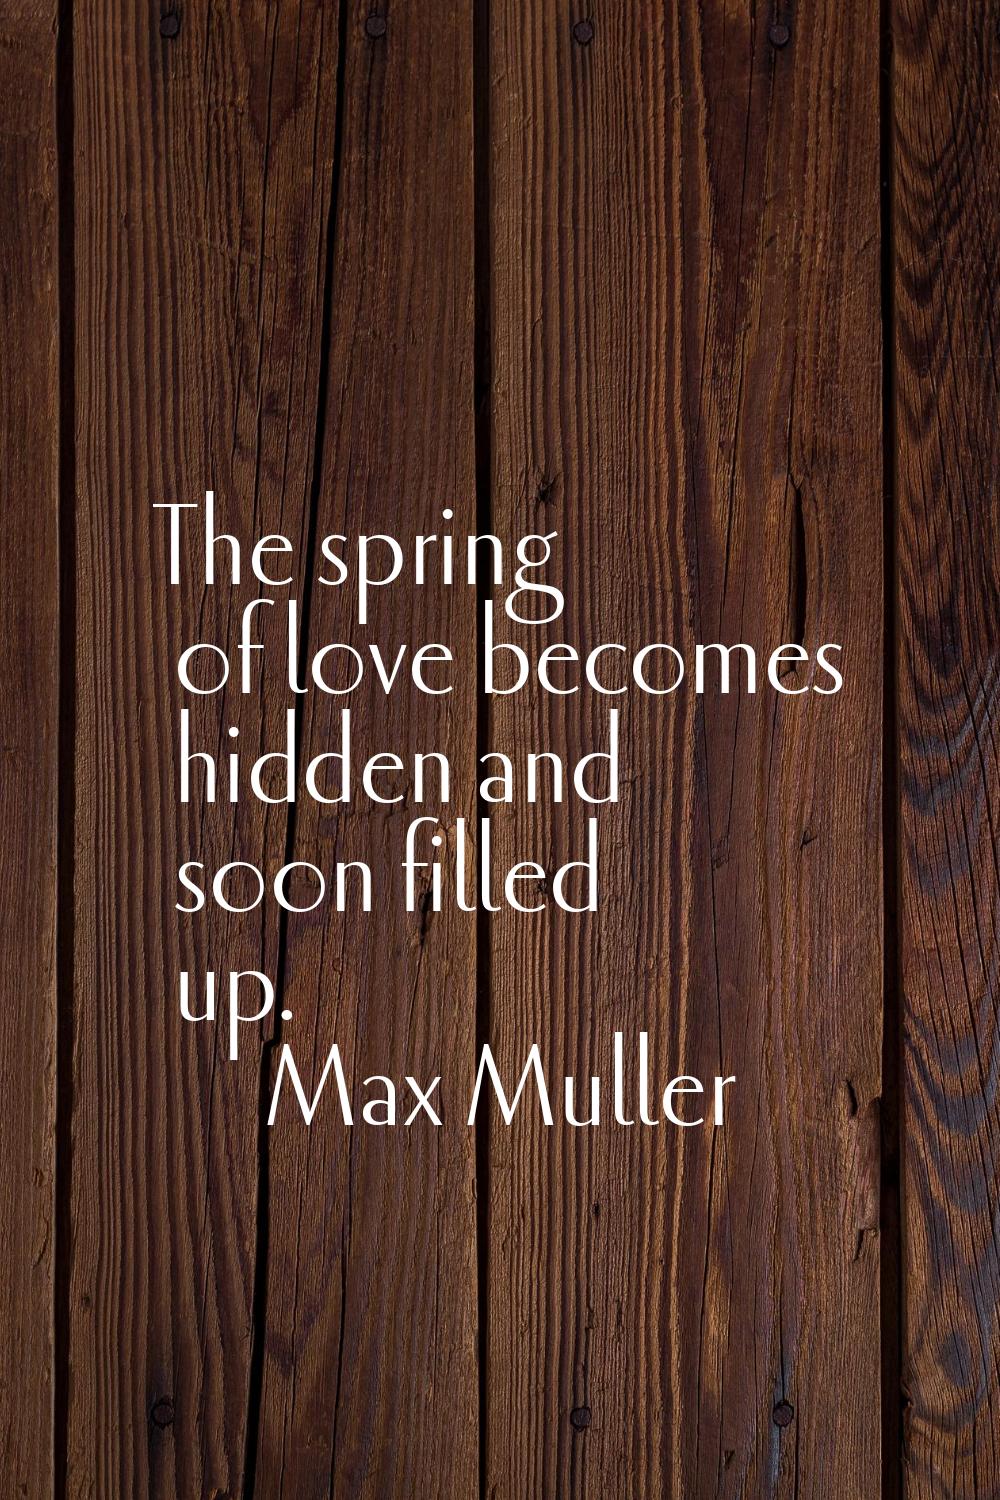 The spring of love becomes hidden and soon filled up.